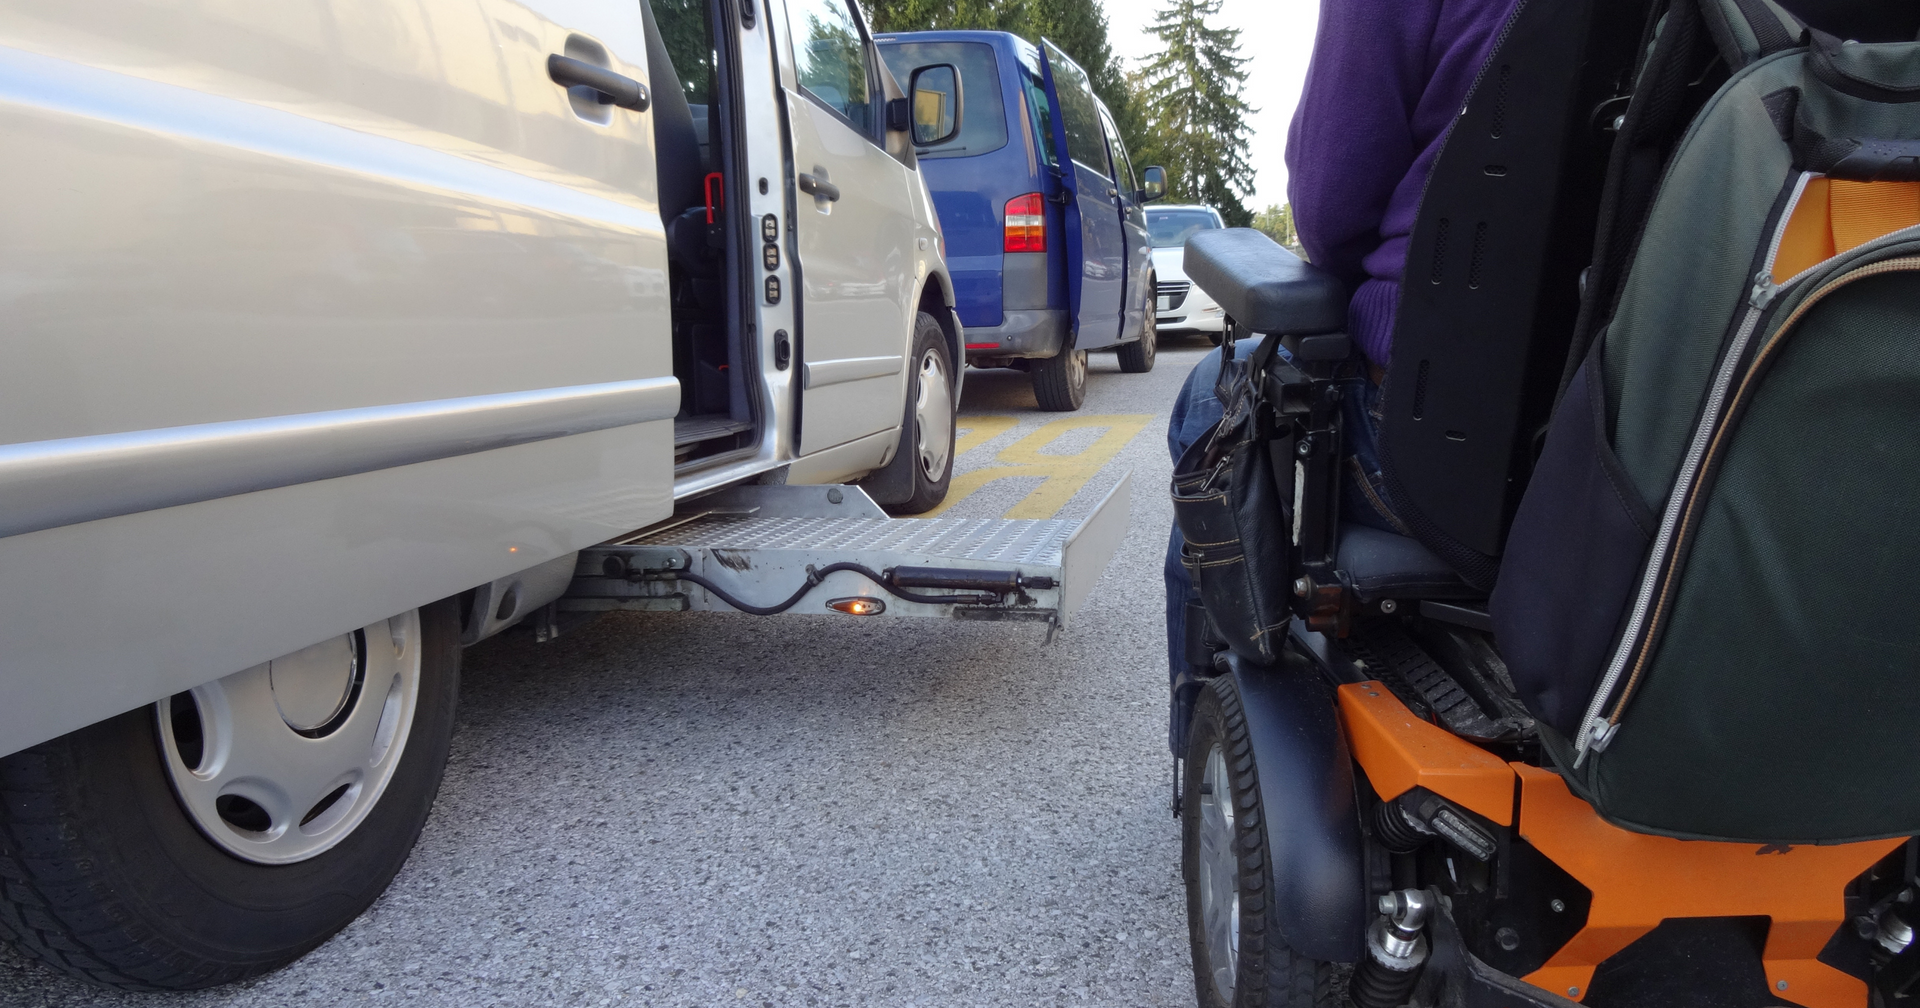 Embracing Mobility Freedom: Wheelchair Accessible Vehicles and Minivans